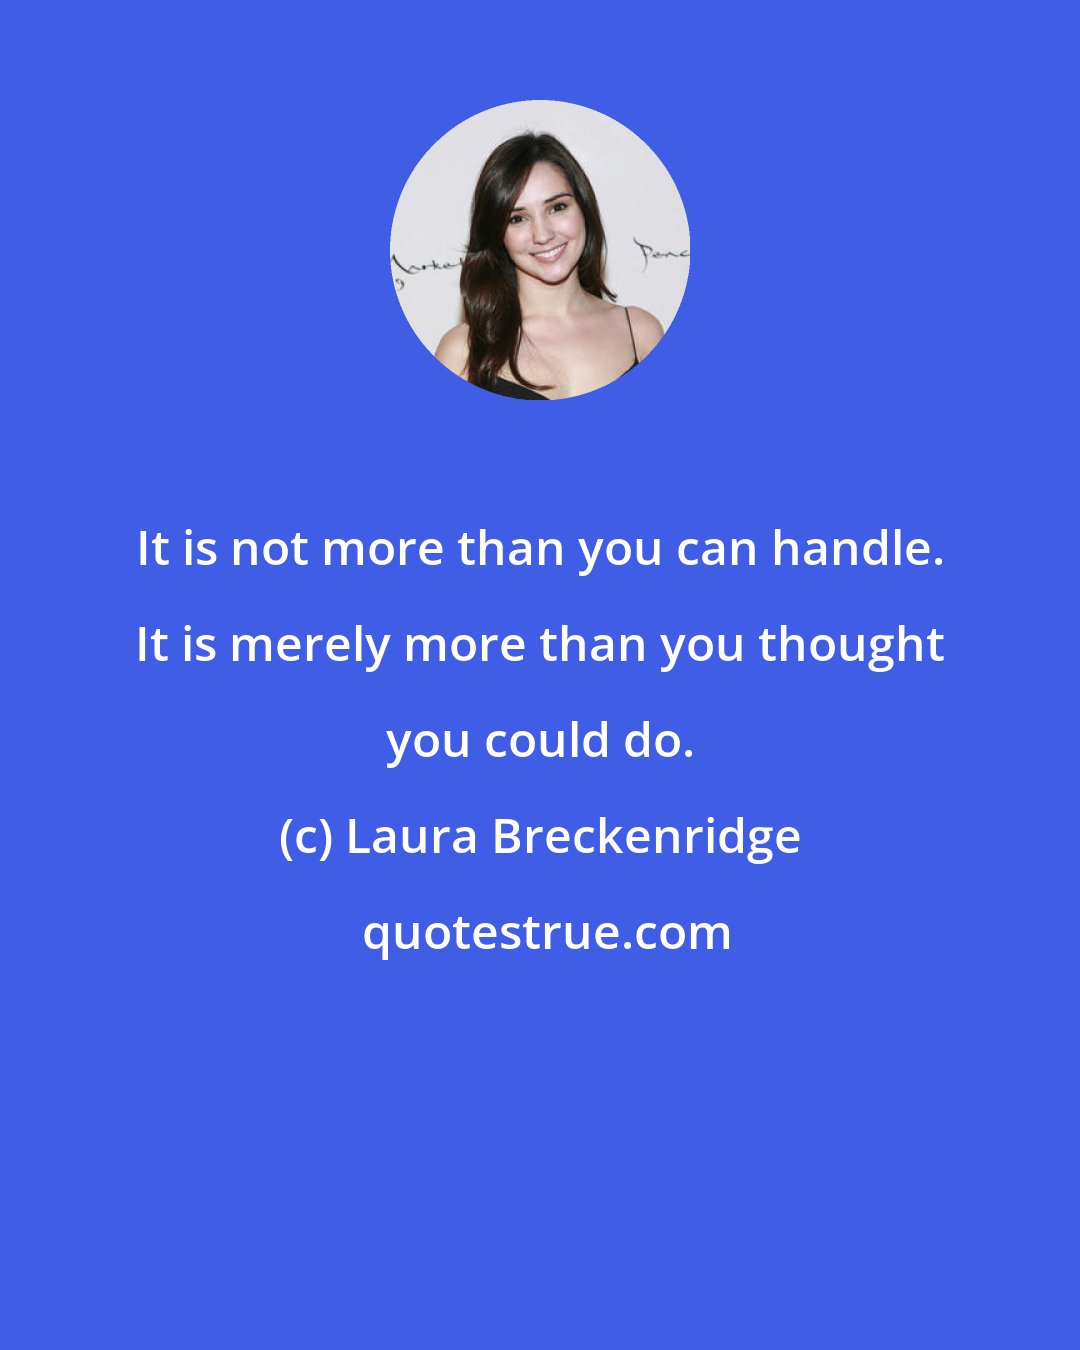 Laura Breckenridge: It is not more than you can handle. It is merely more than you thought you could do.